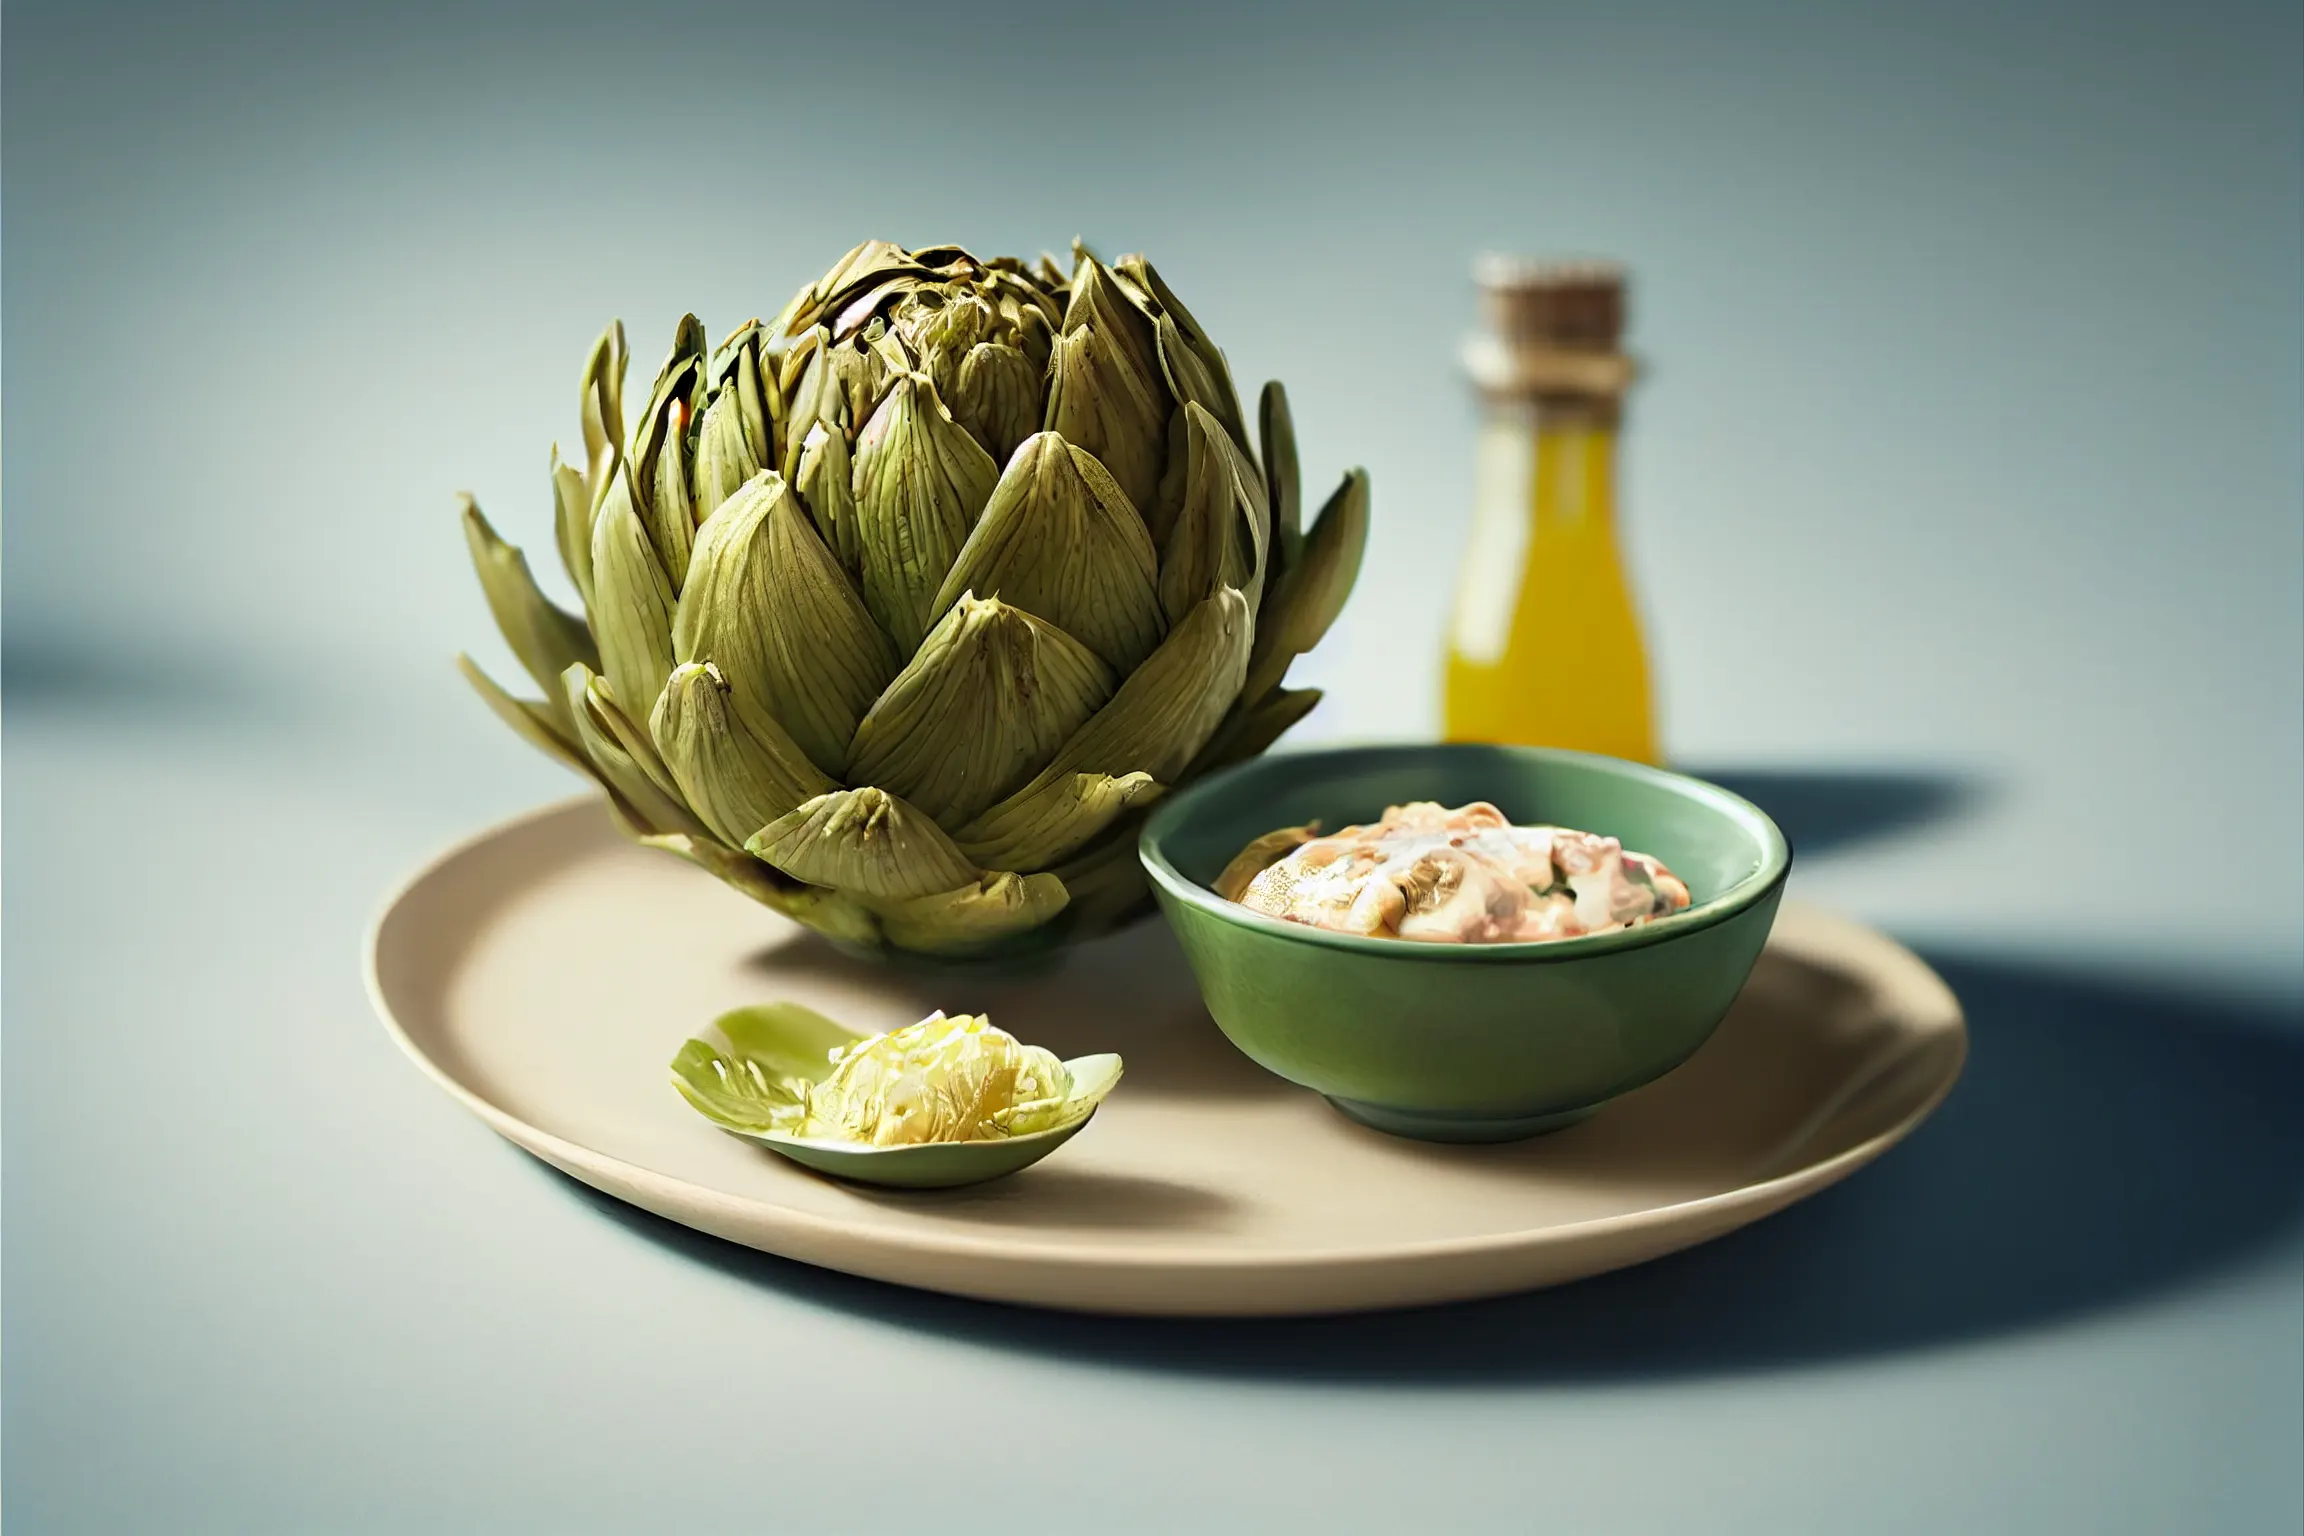 Artichoke with Remoulade